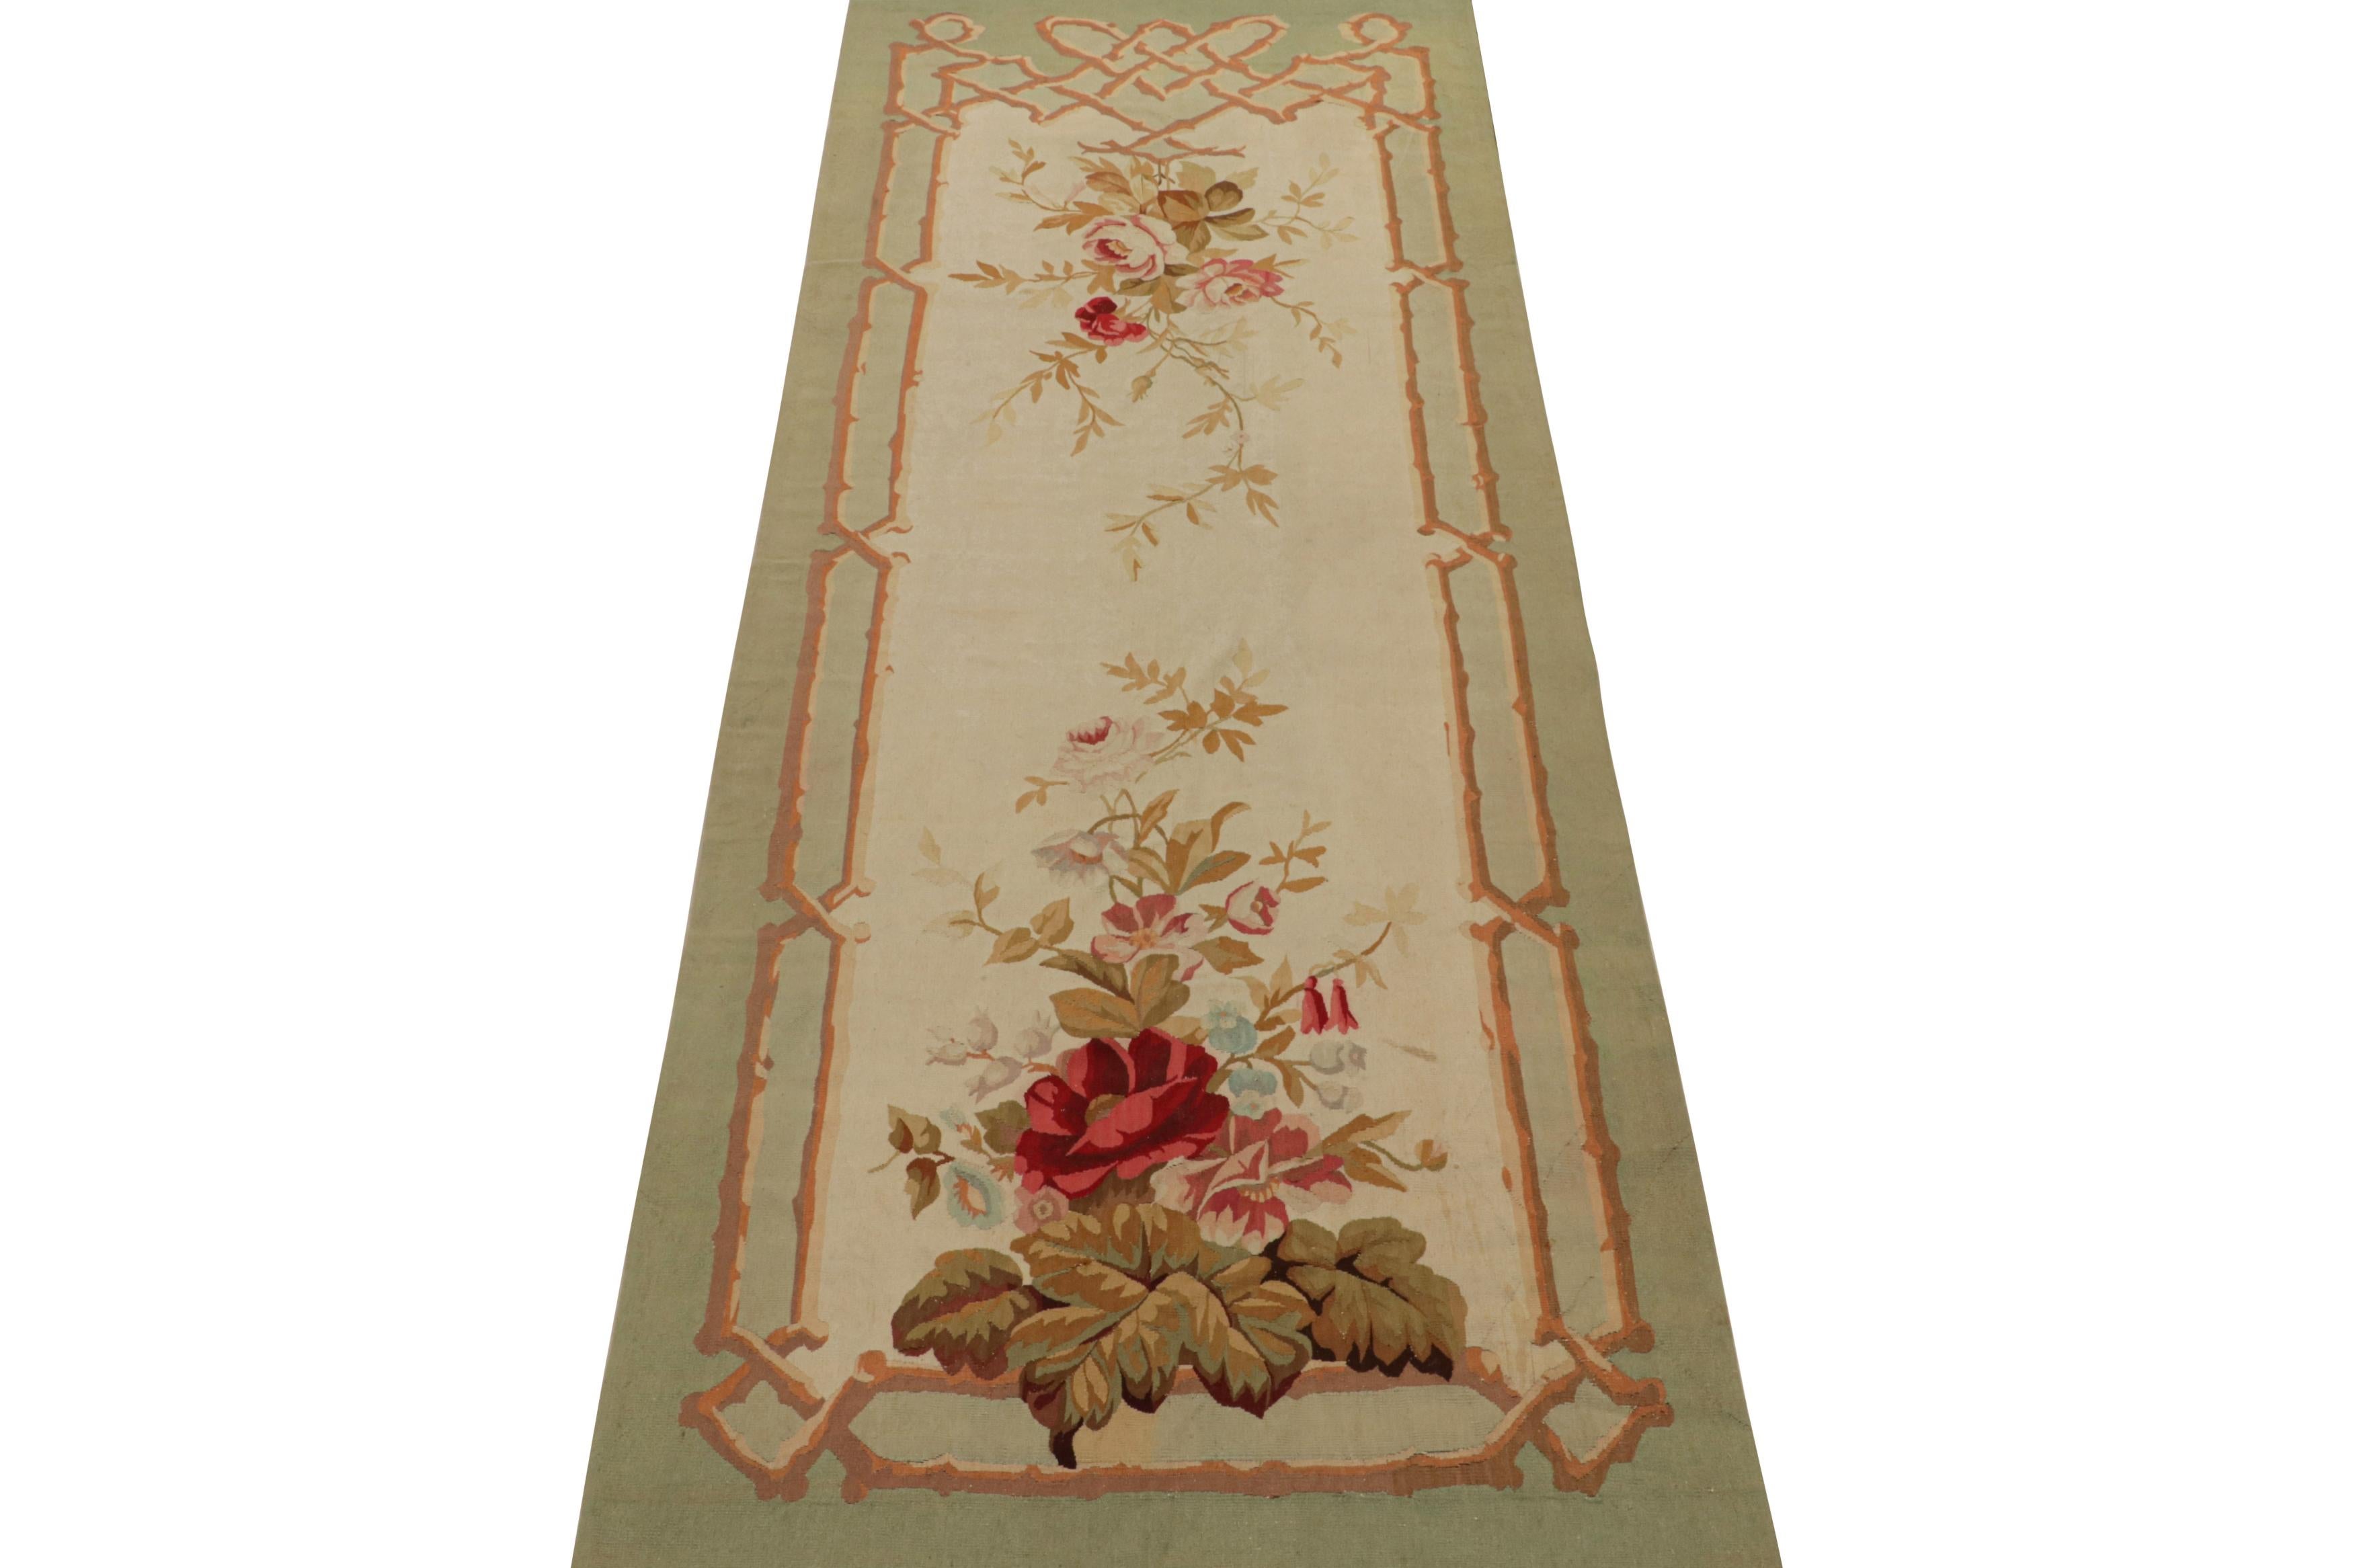 This 4x11 antique Aubusson tapestry runner rug is one of a rare set of twin flatweaves from turn-of-the-century France. Both handwoven in wool circa 1890-1900, their design features green and brown borders around a cream field with colorful, finely